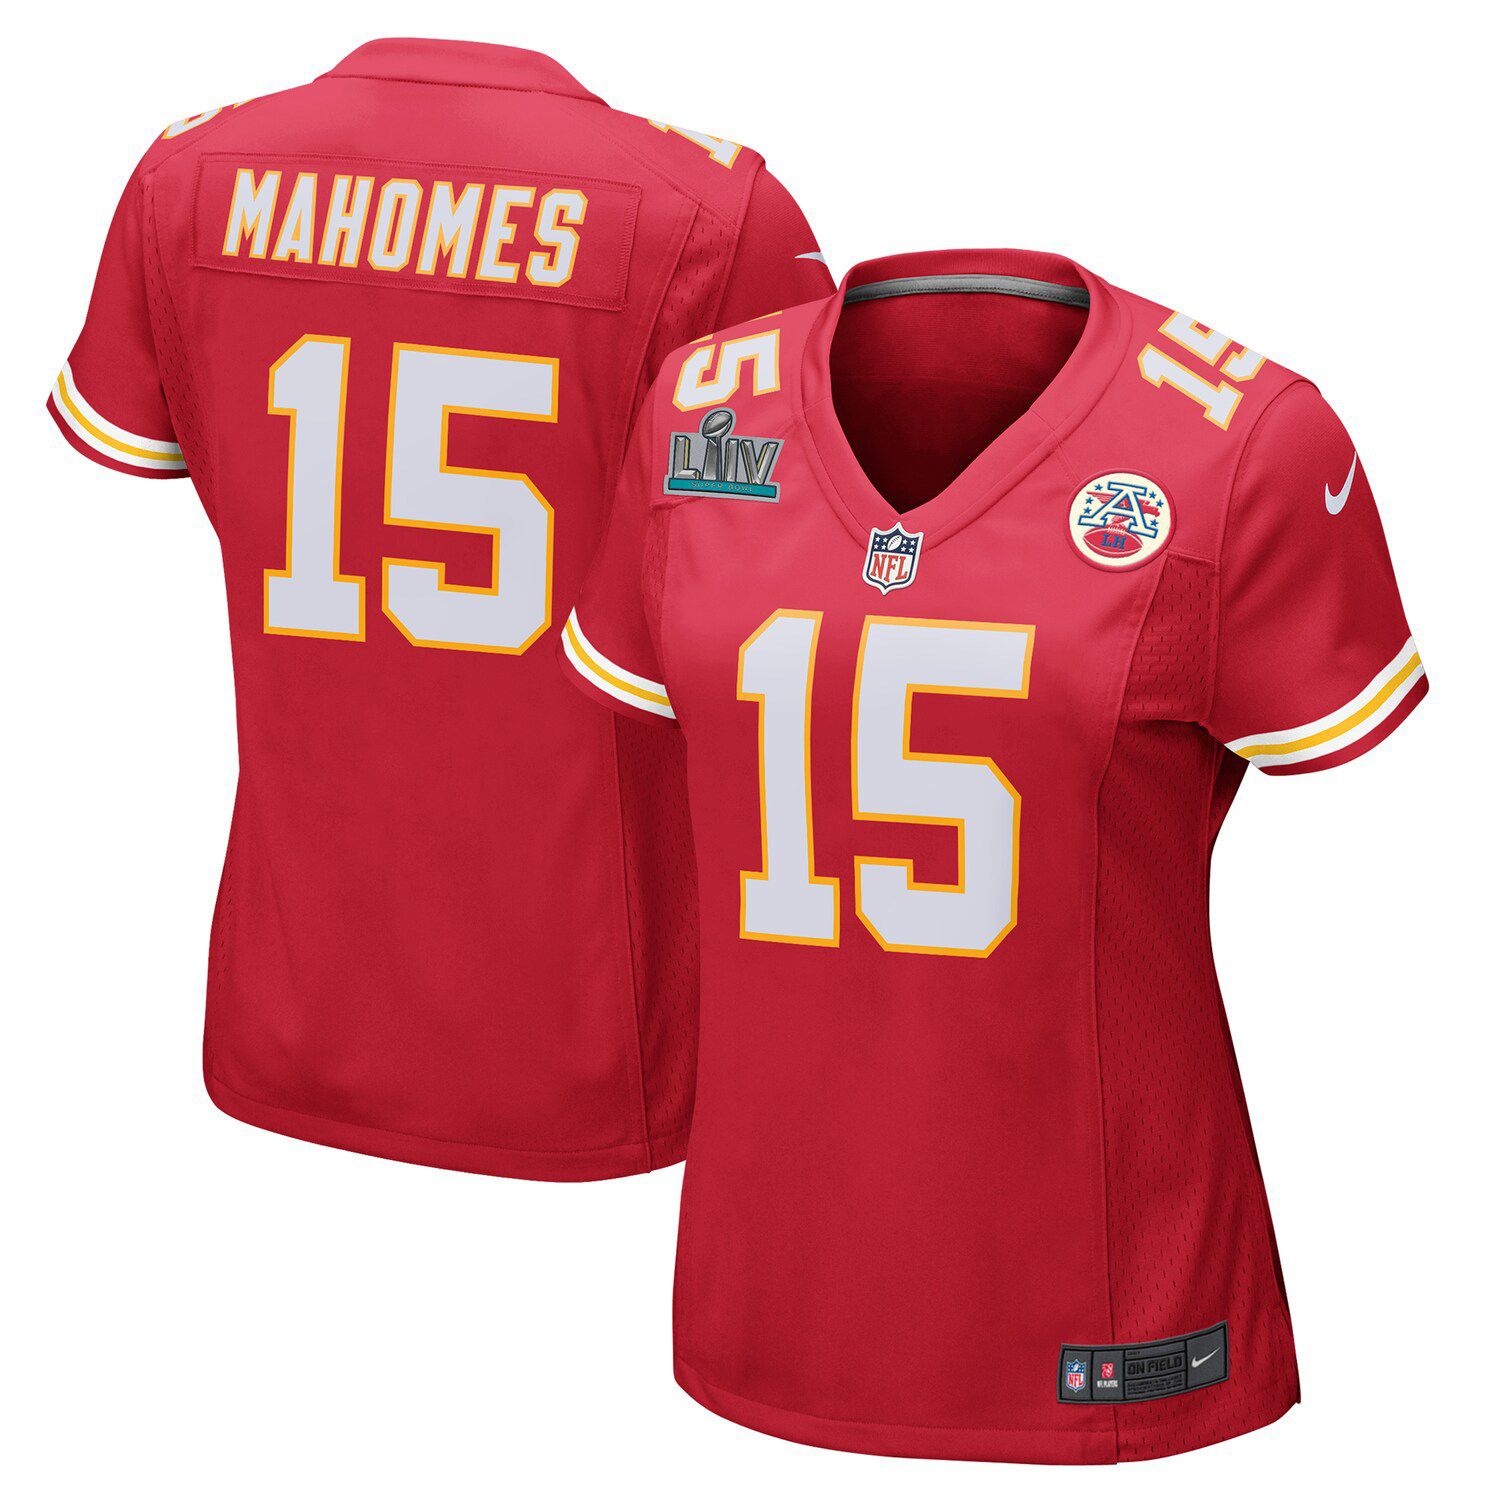 red mahomes super bowl jersey